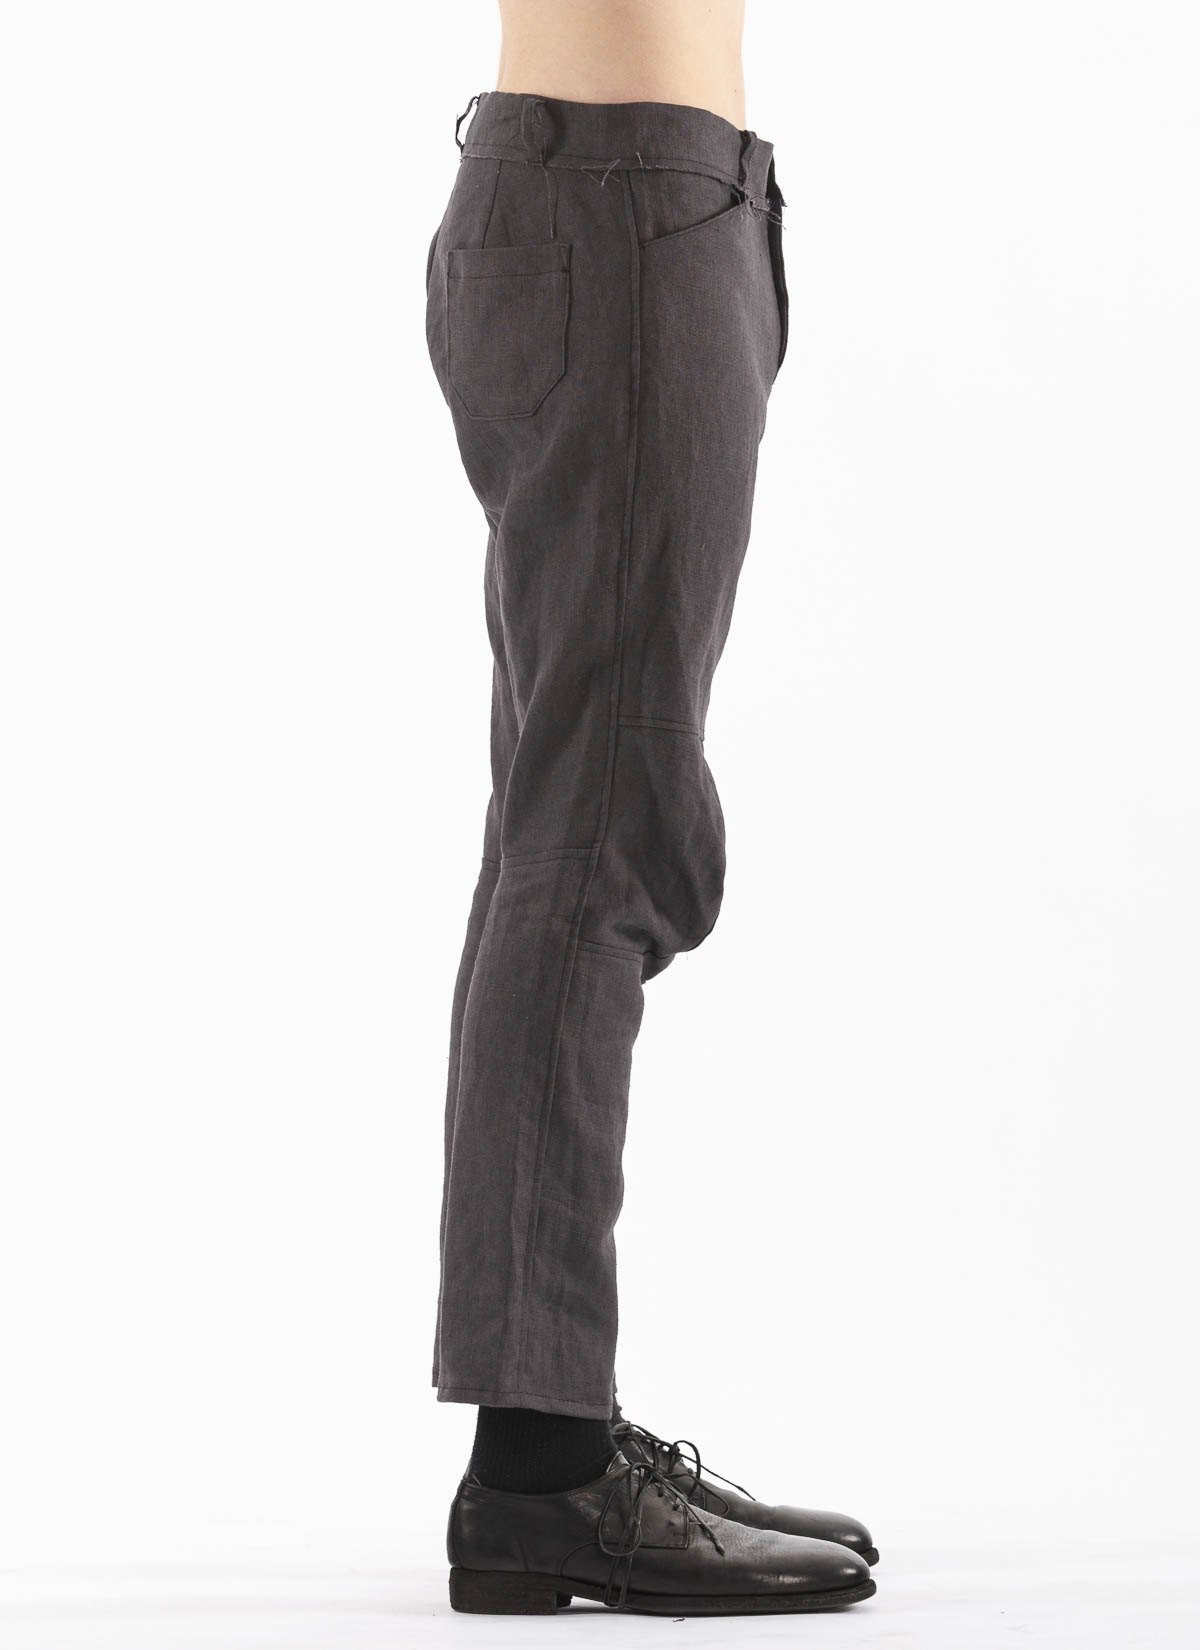 hide-m | PROPOSITION CLOTHING Articulated Pants, dark grey ramie